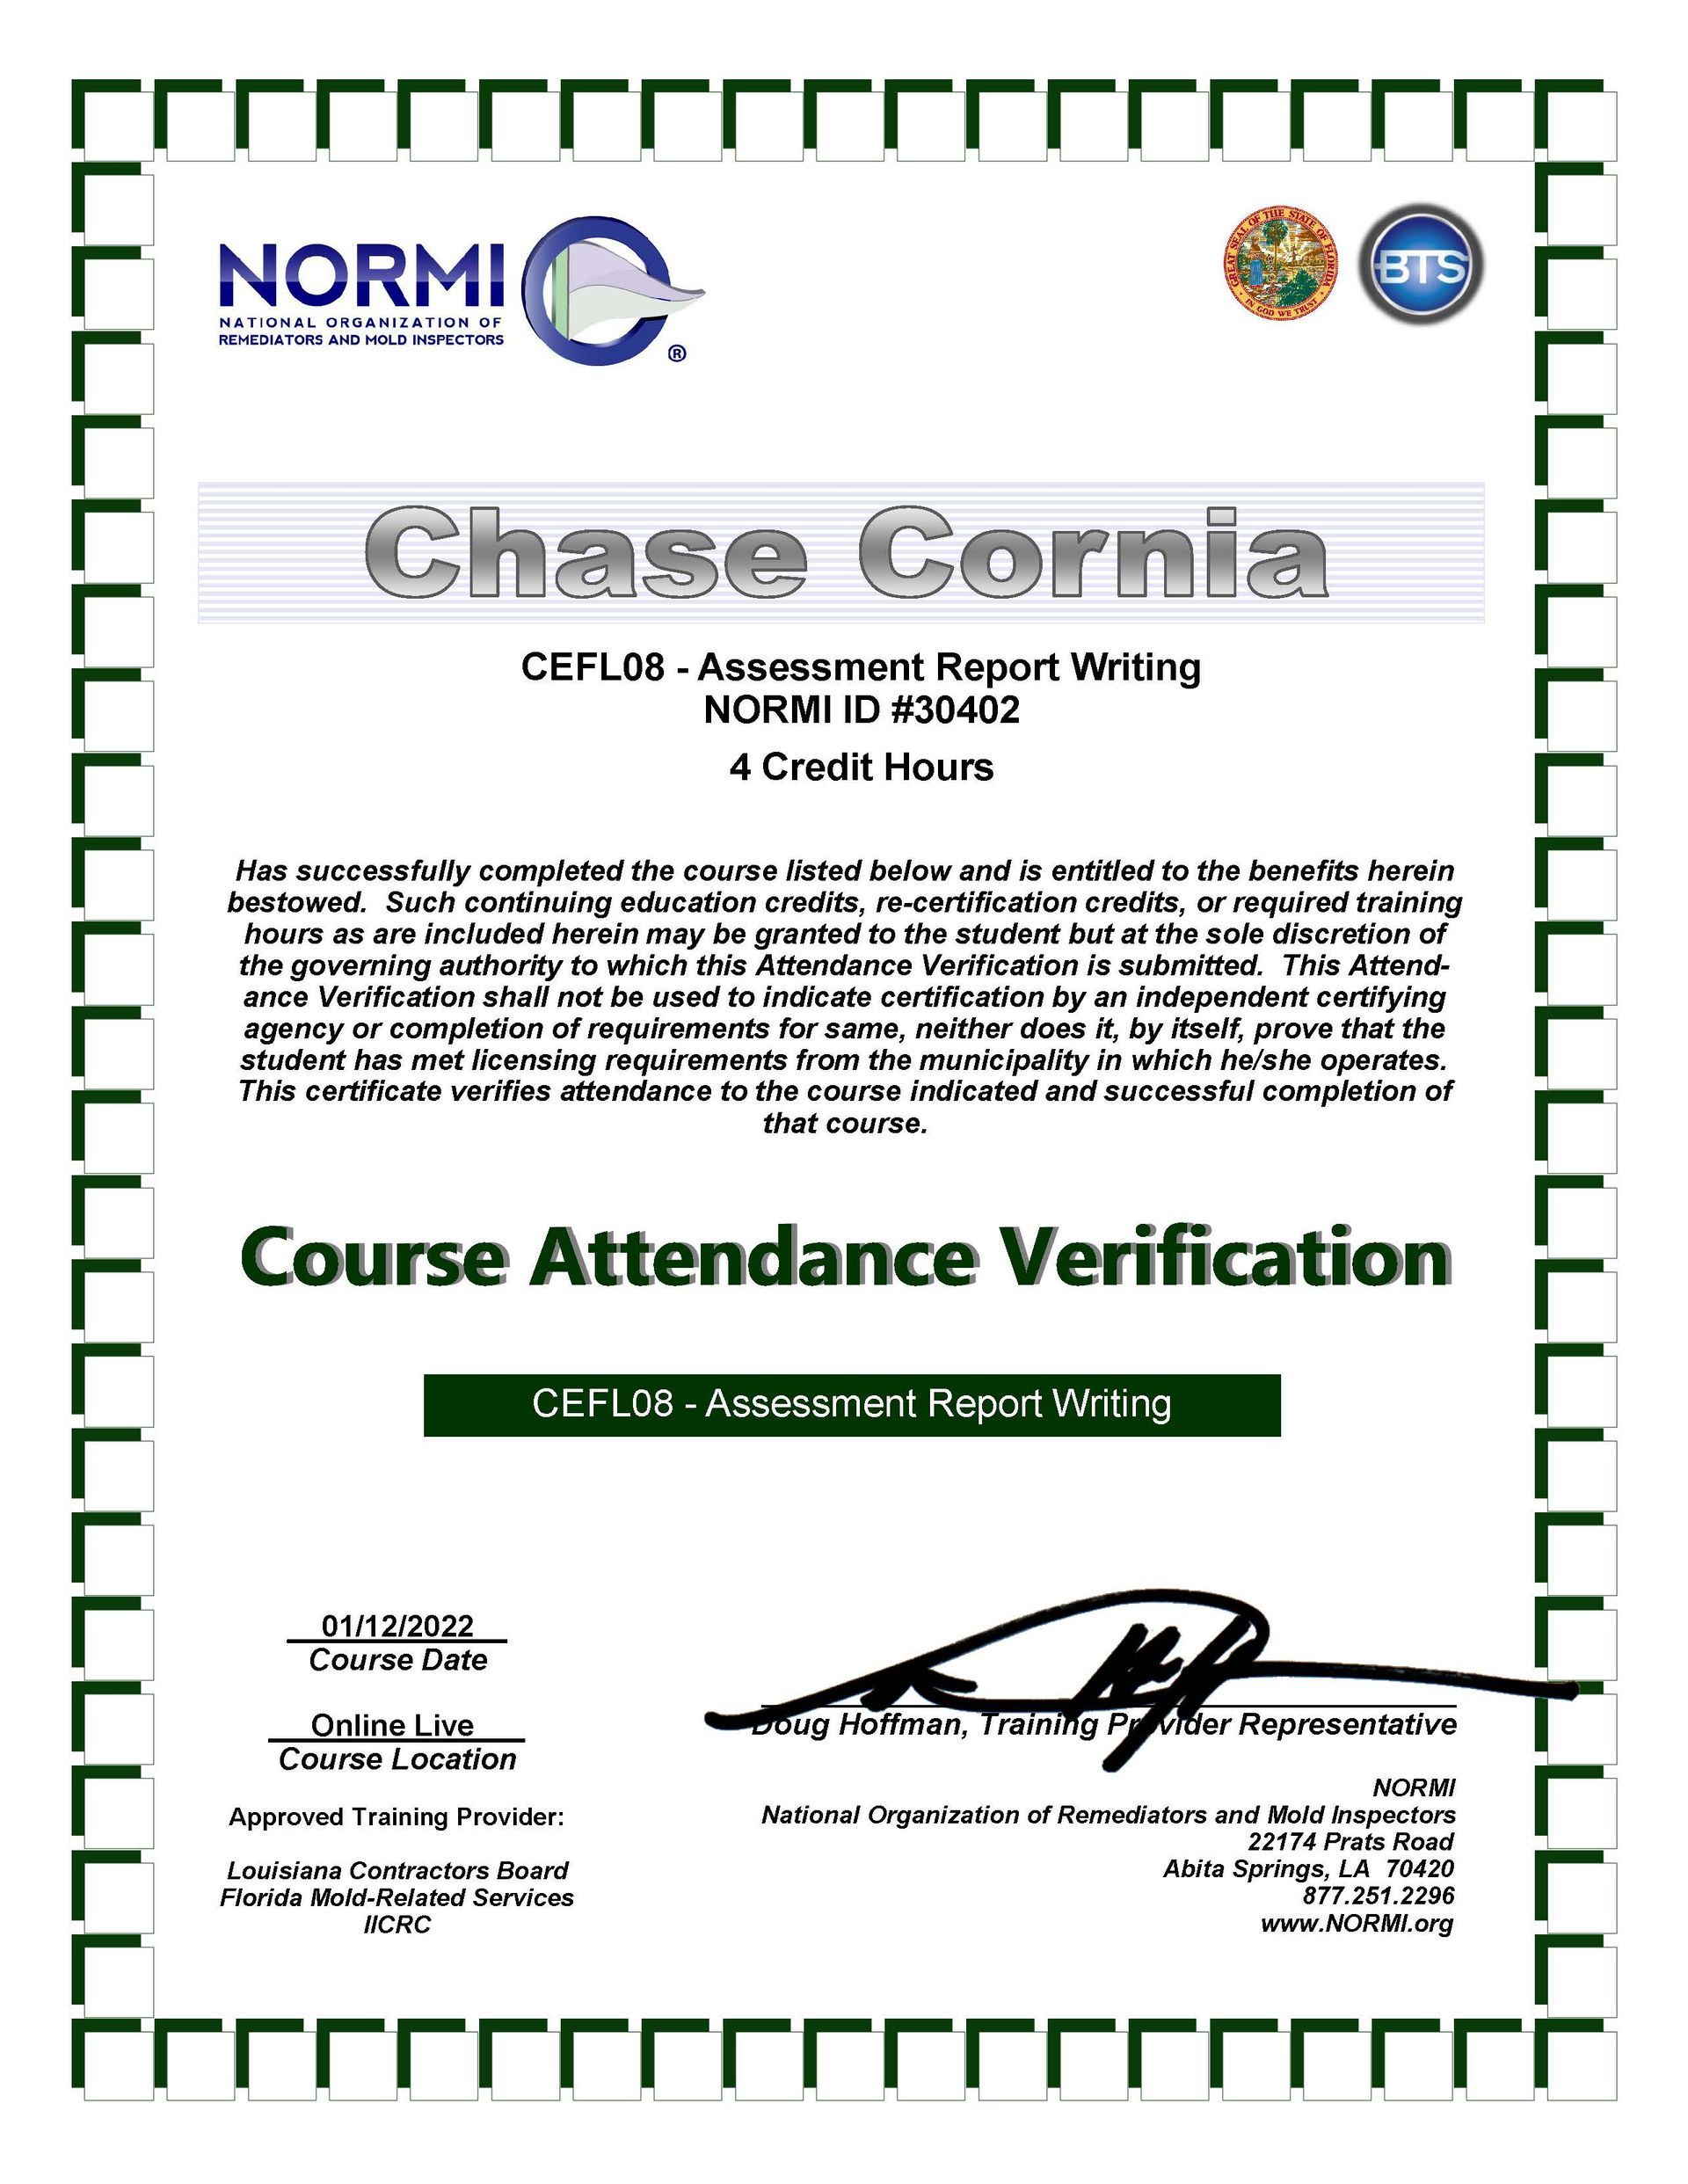 chase cornia has successfully completed the course listed below and is entitled to the benefits herein bestowed